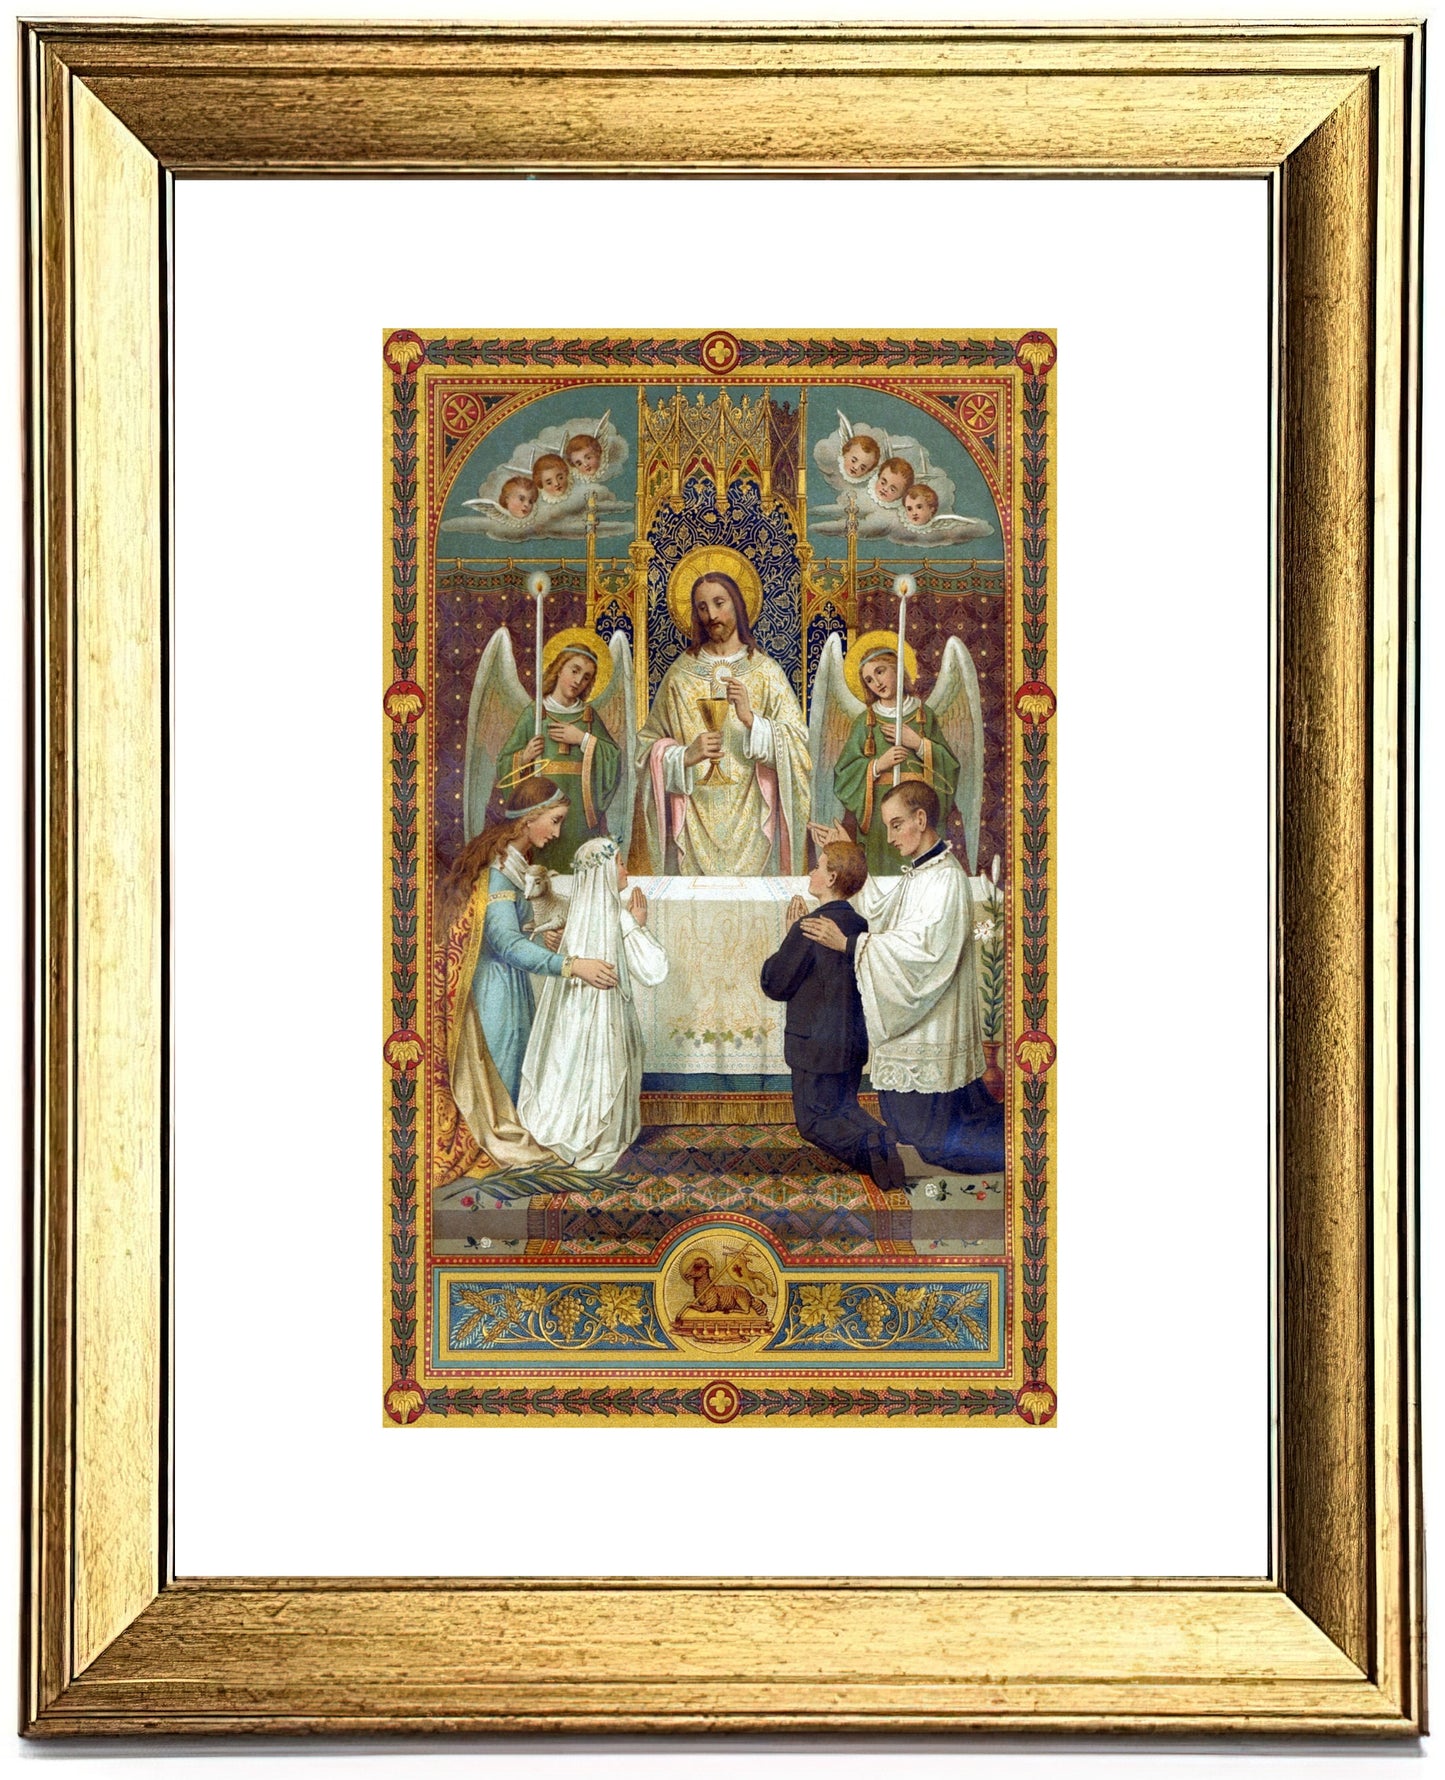 First Communion / Jesus Gives Eucharist – Based on Vintage Holy Card – Catholic Art Print – Communion Gift – Archival Quality